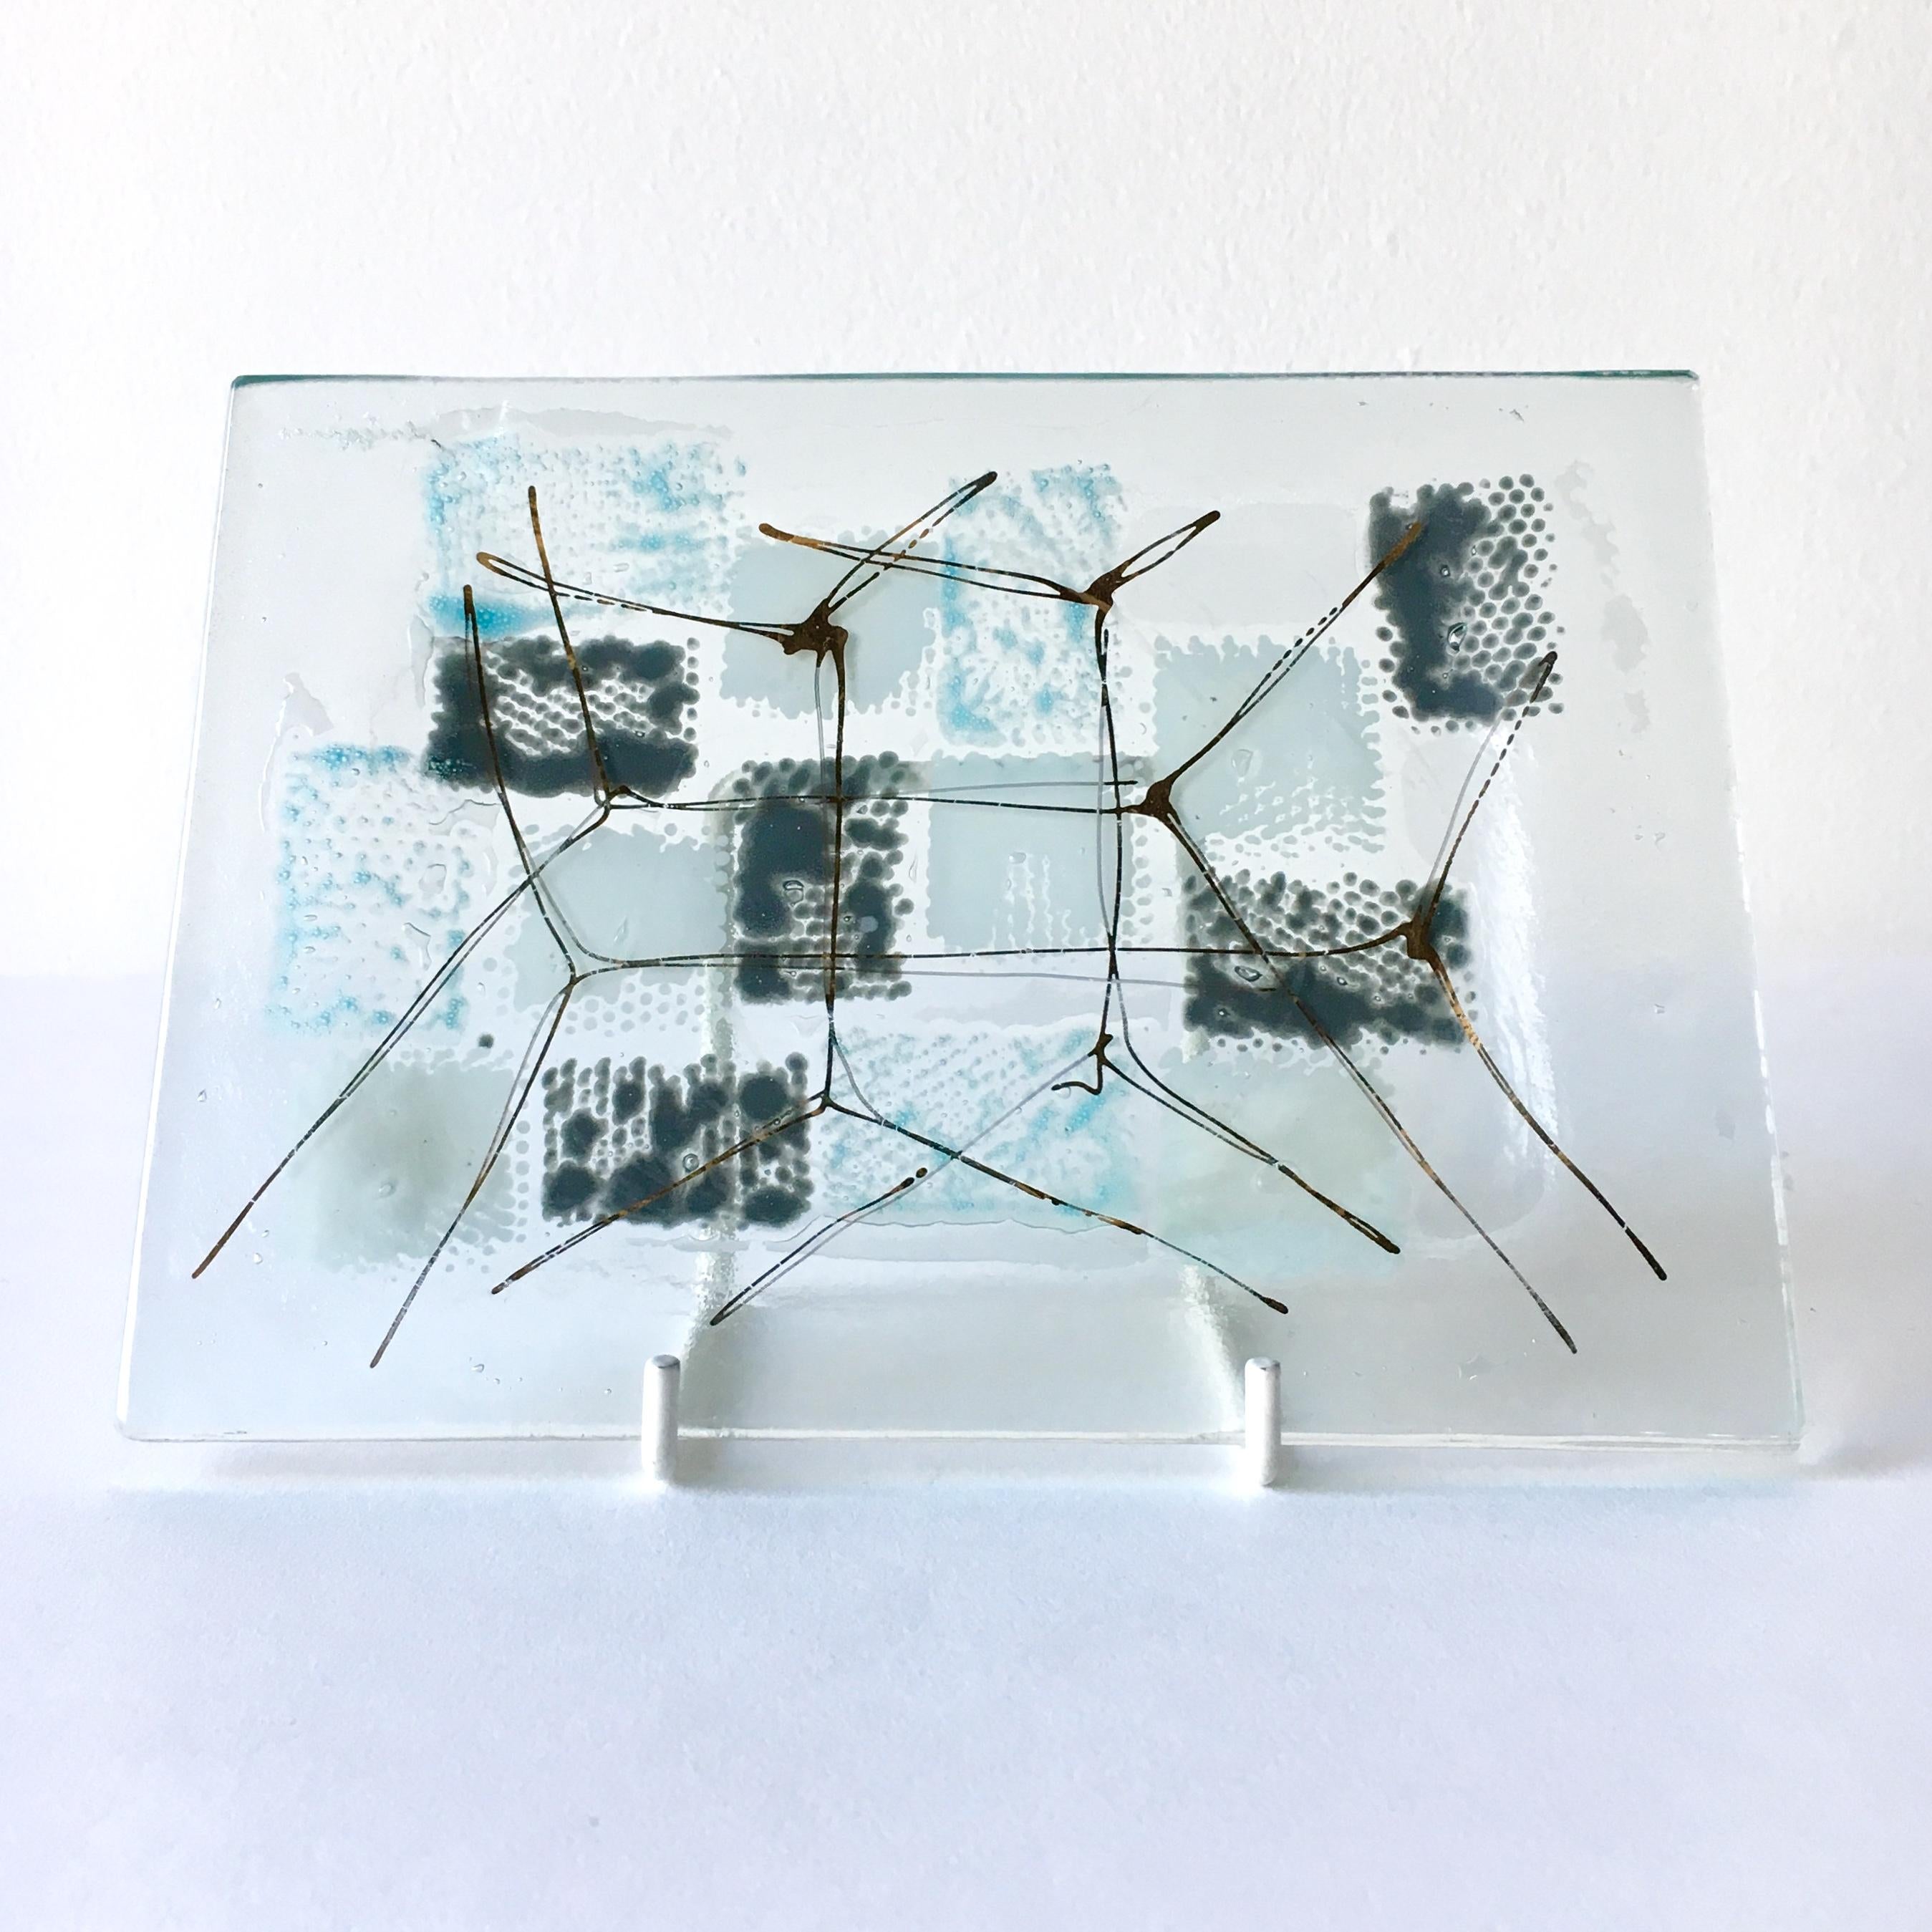 A rectangular patchwork fused glass plate by Michael and Frances Higgins, USA, 1957-1965

Michael Higgins (1908-1999) and Frances Higgins(1912-2004) met in Chicago and were married in 1948. They had a fascination of modern glass fusing. Their